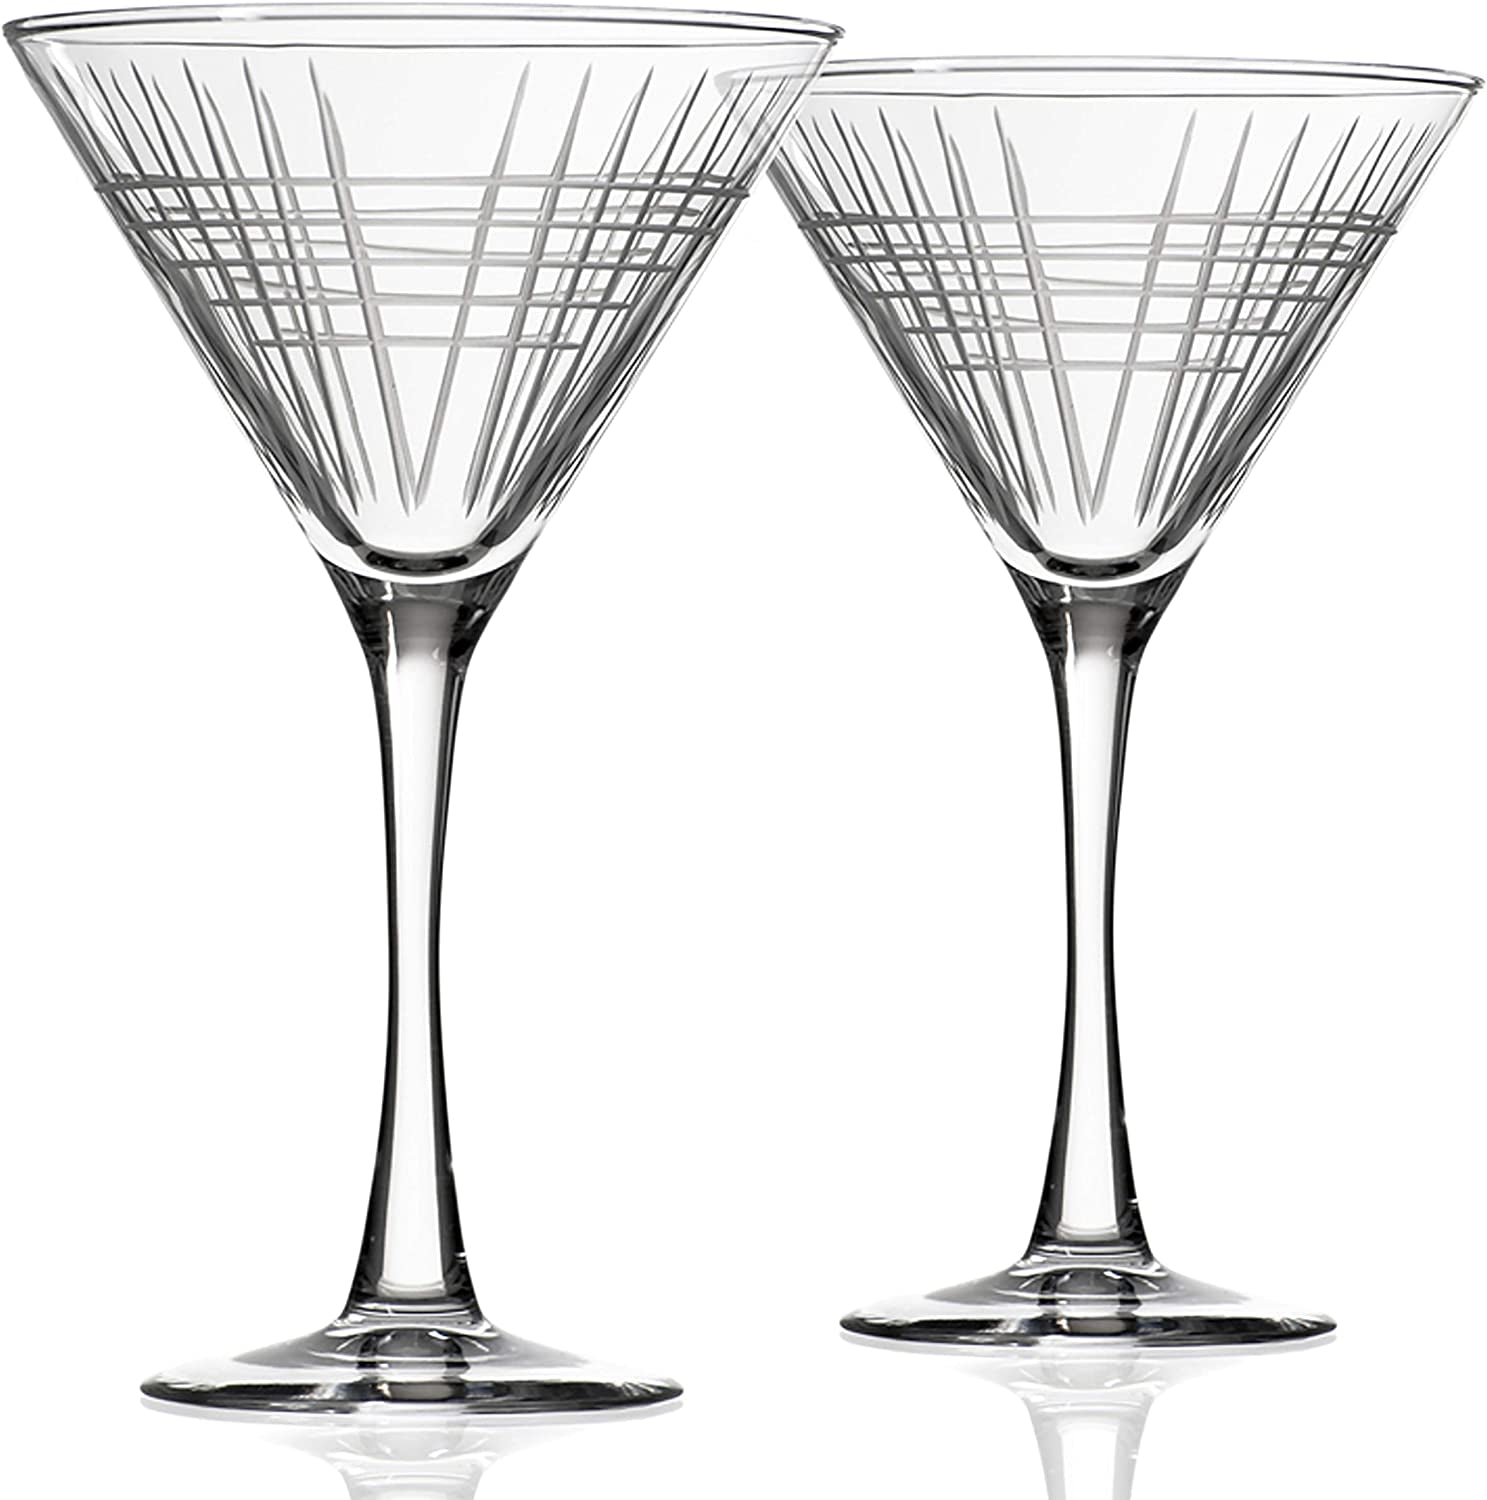 Matchstick Martini Glass - Set of 2 Stemmed 10 Ounce Martini Glasses - Lead-Free Glass - Diamond-Wheel Engraved Cocktail Glasses - Made in the USA